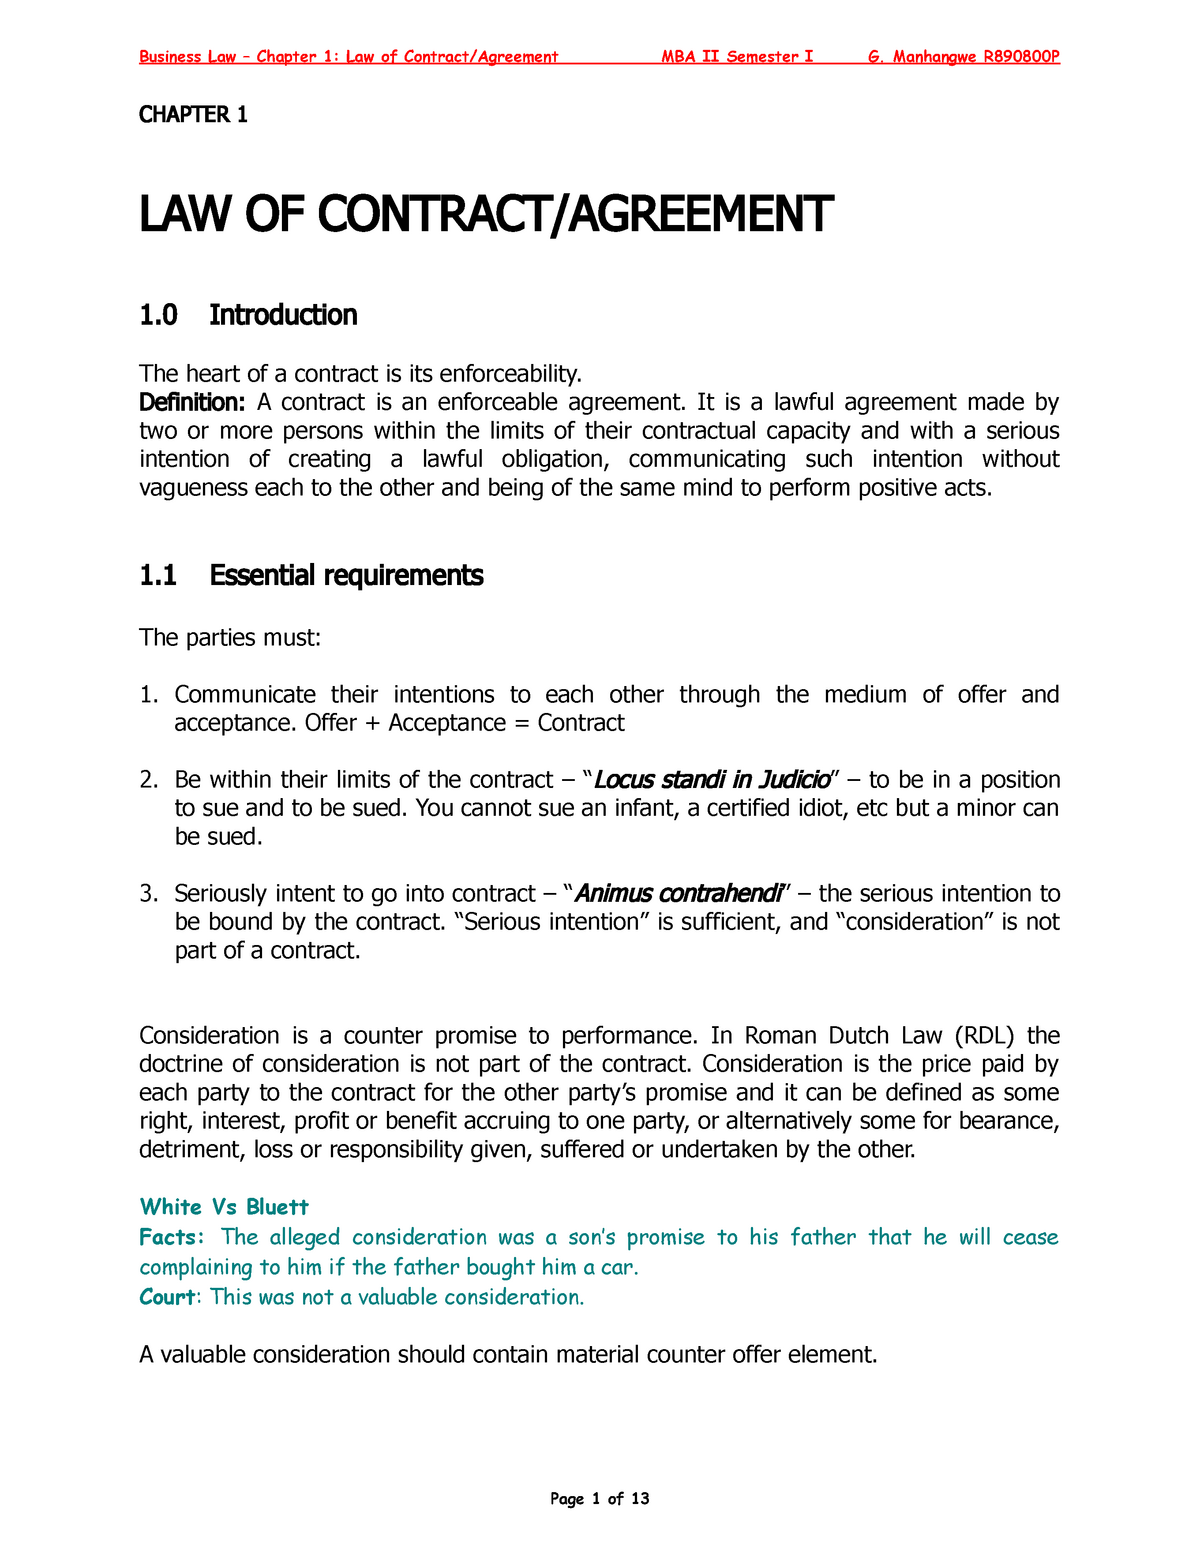 law of contract research paper